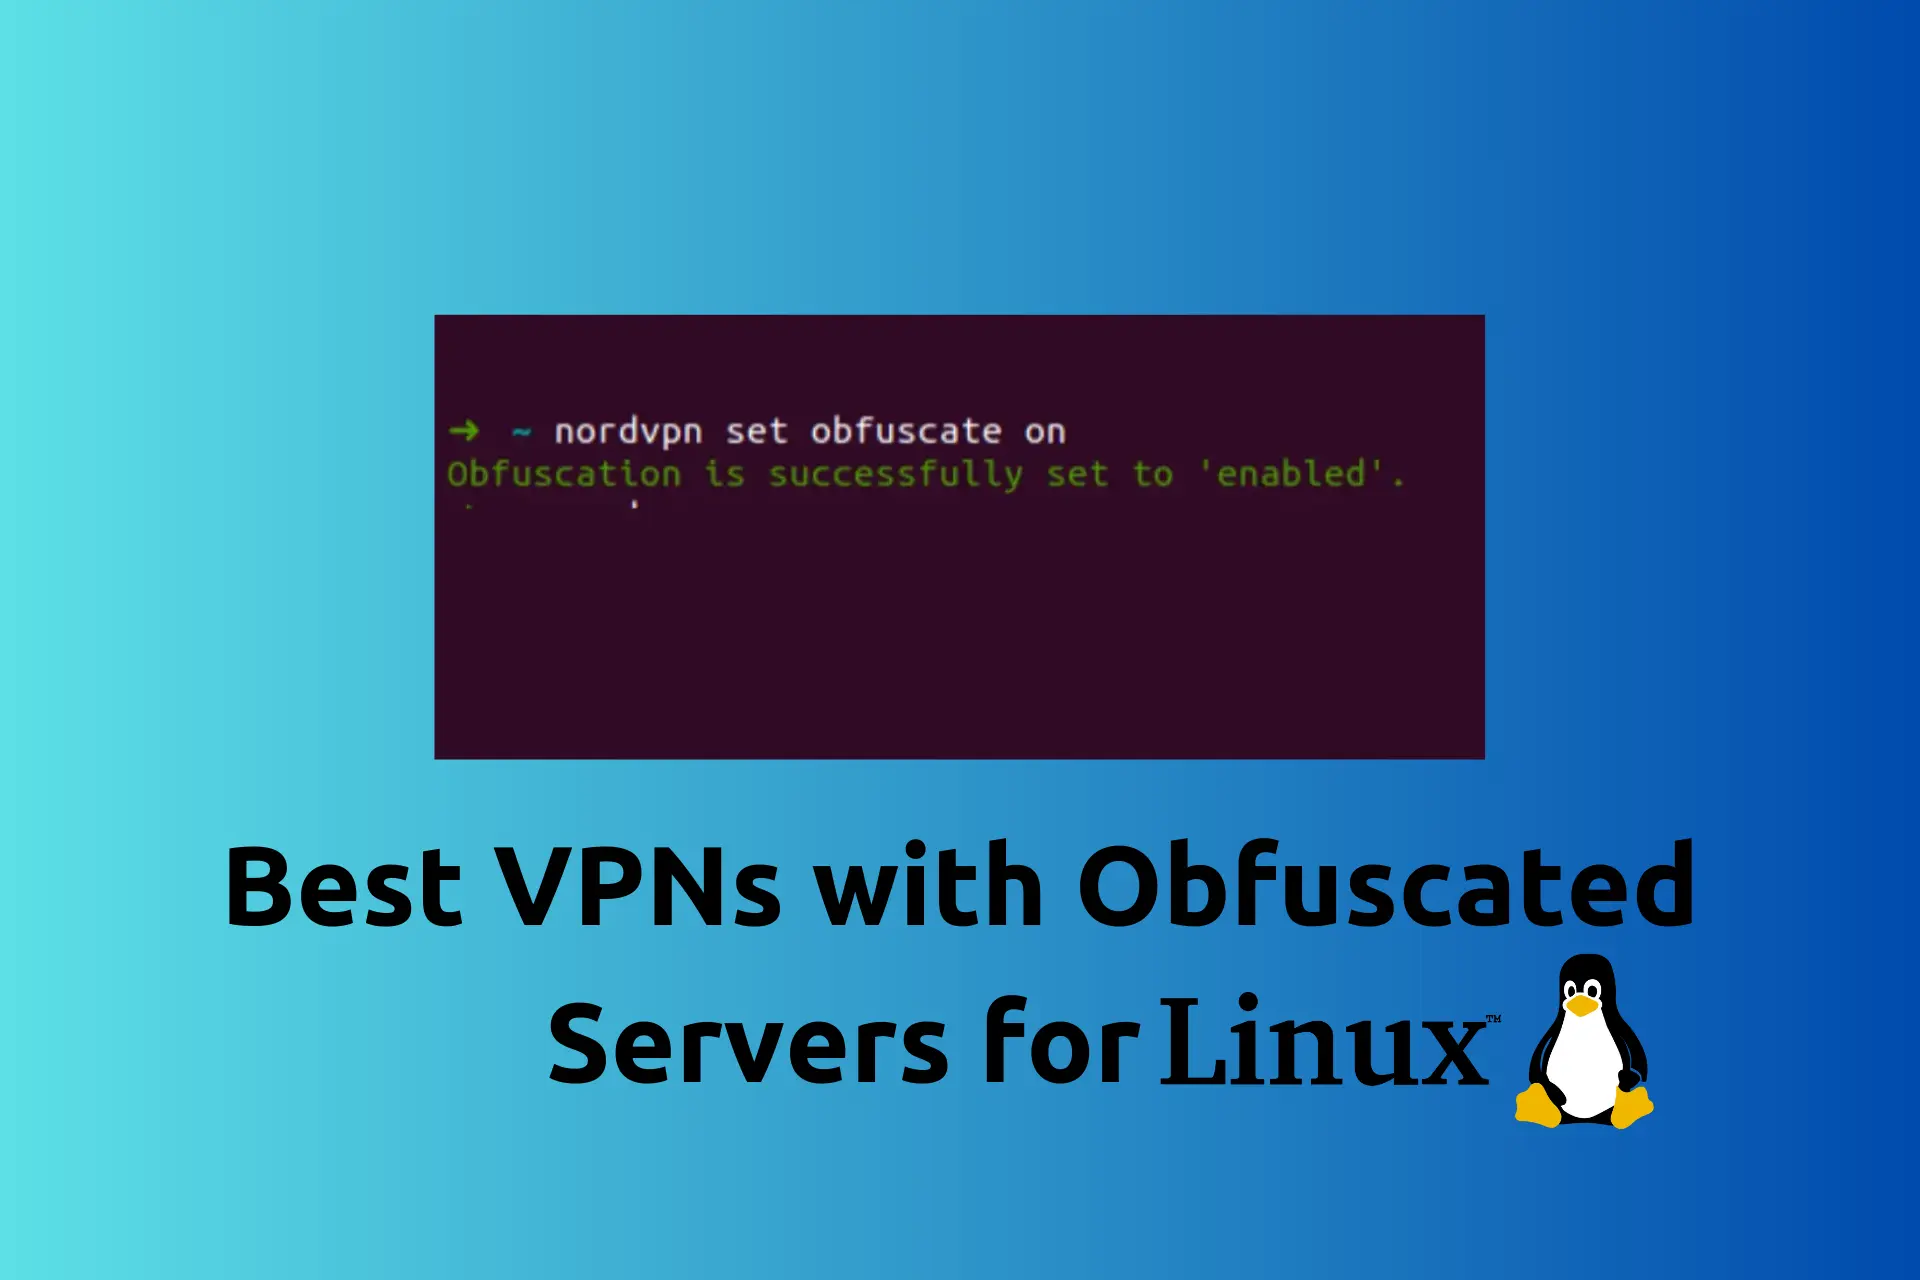 vpn with obfuscated servers for linux